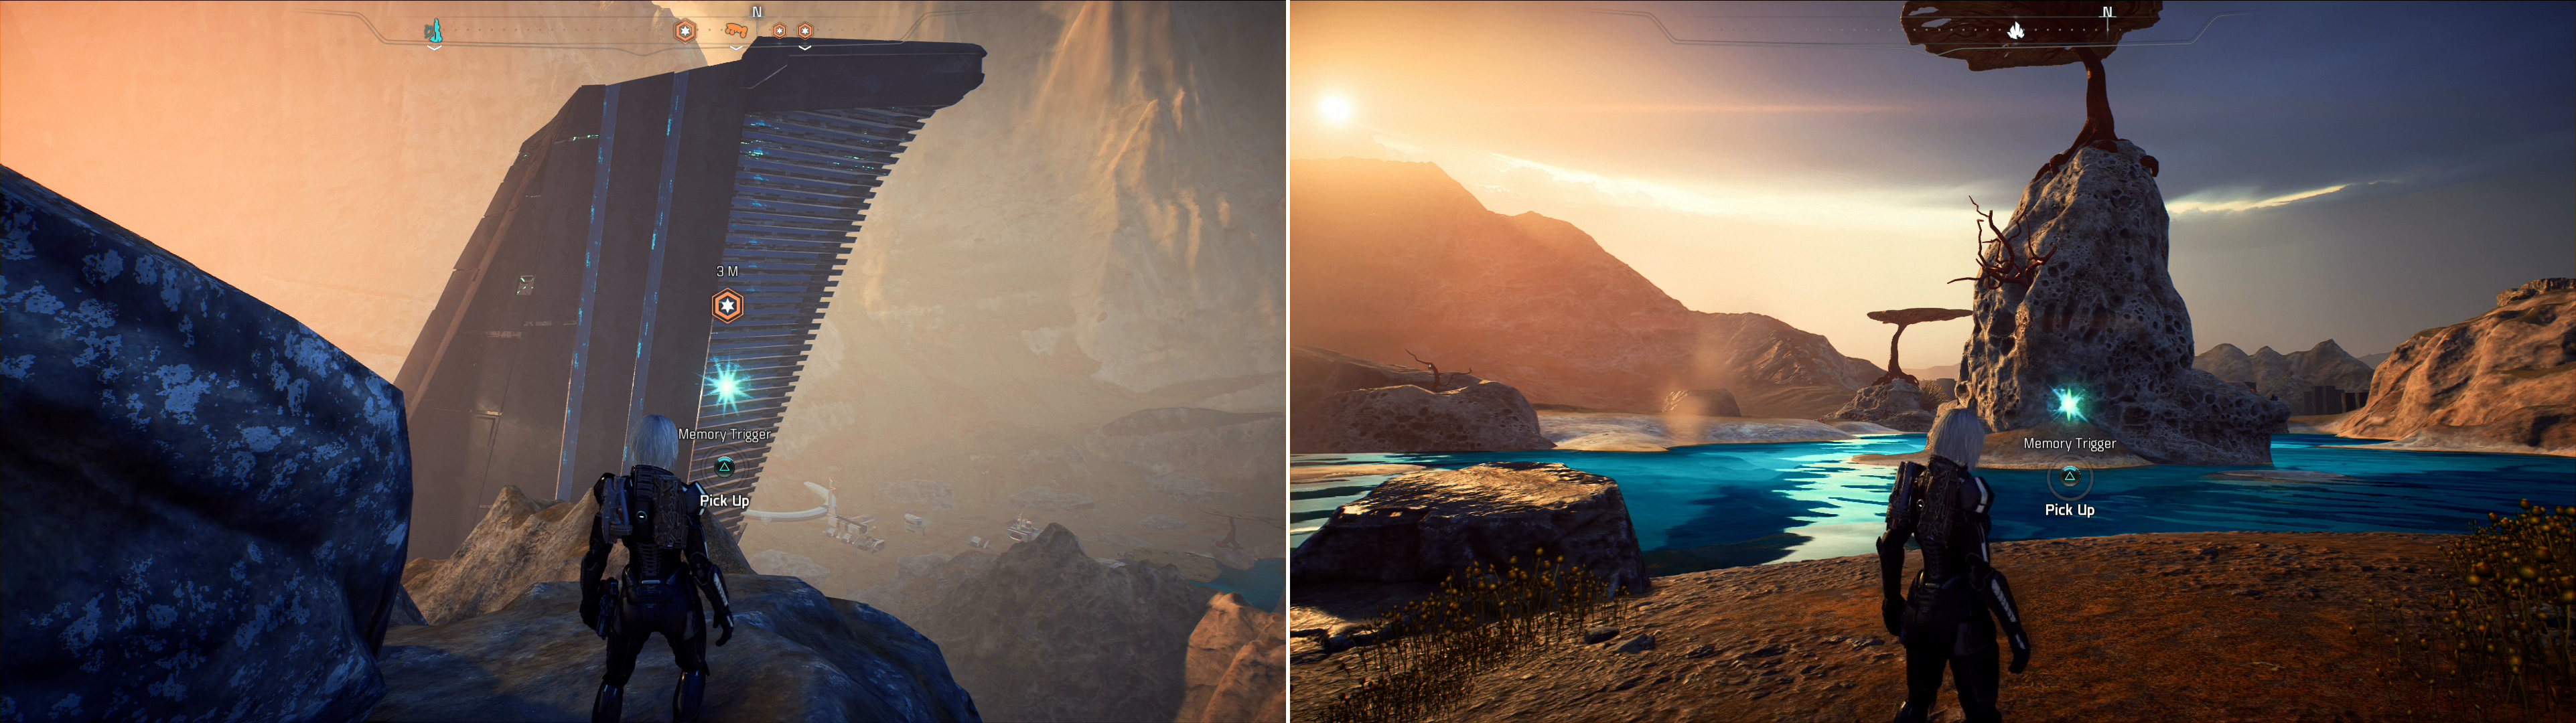 Find one Memory Trigger near a monolith (left) while another can be found on the southern shore of the lake in Kurinths Valley (right).